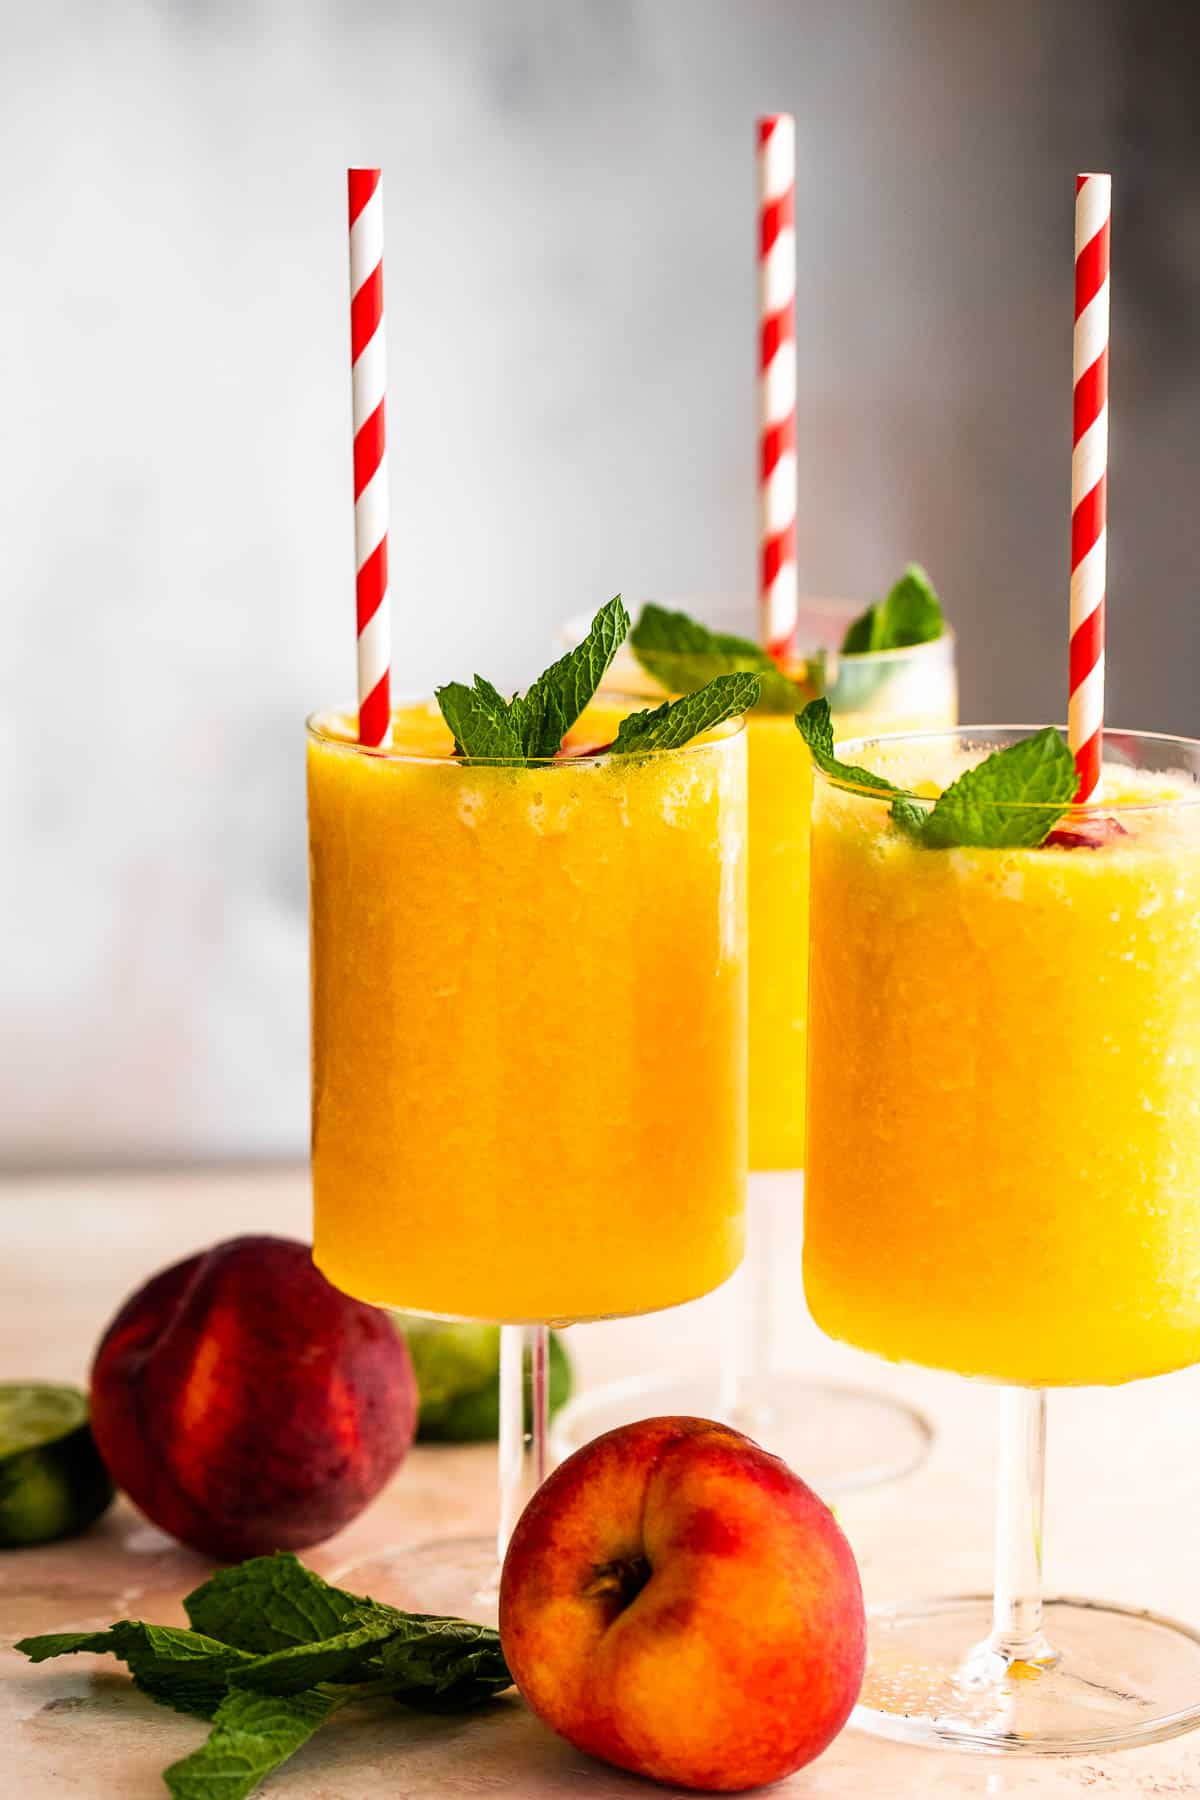 three glasses filled with peach daiquiris and garnished with mint, peach slices, and straws